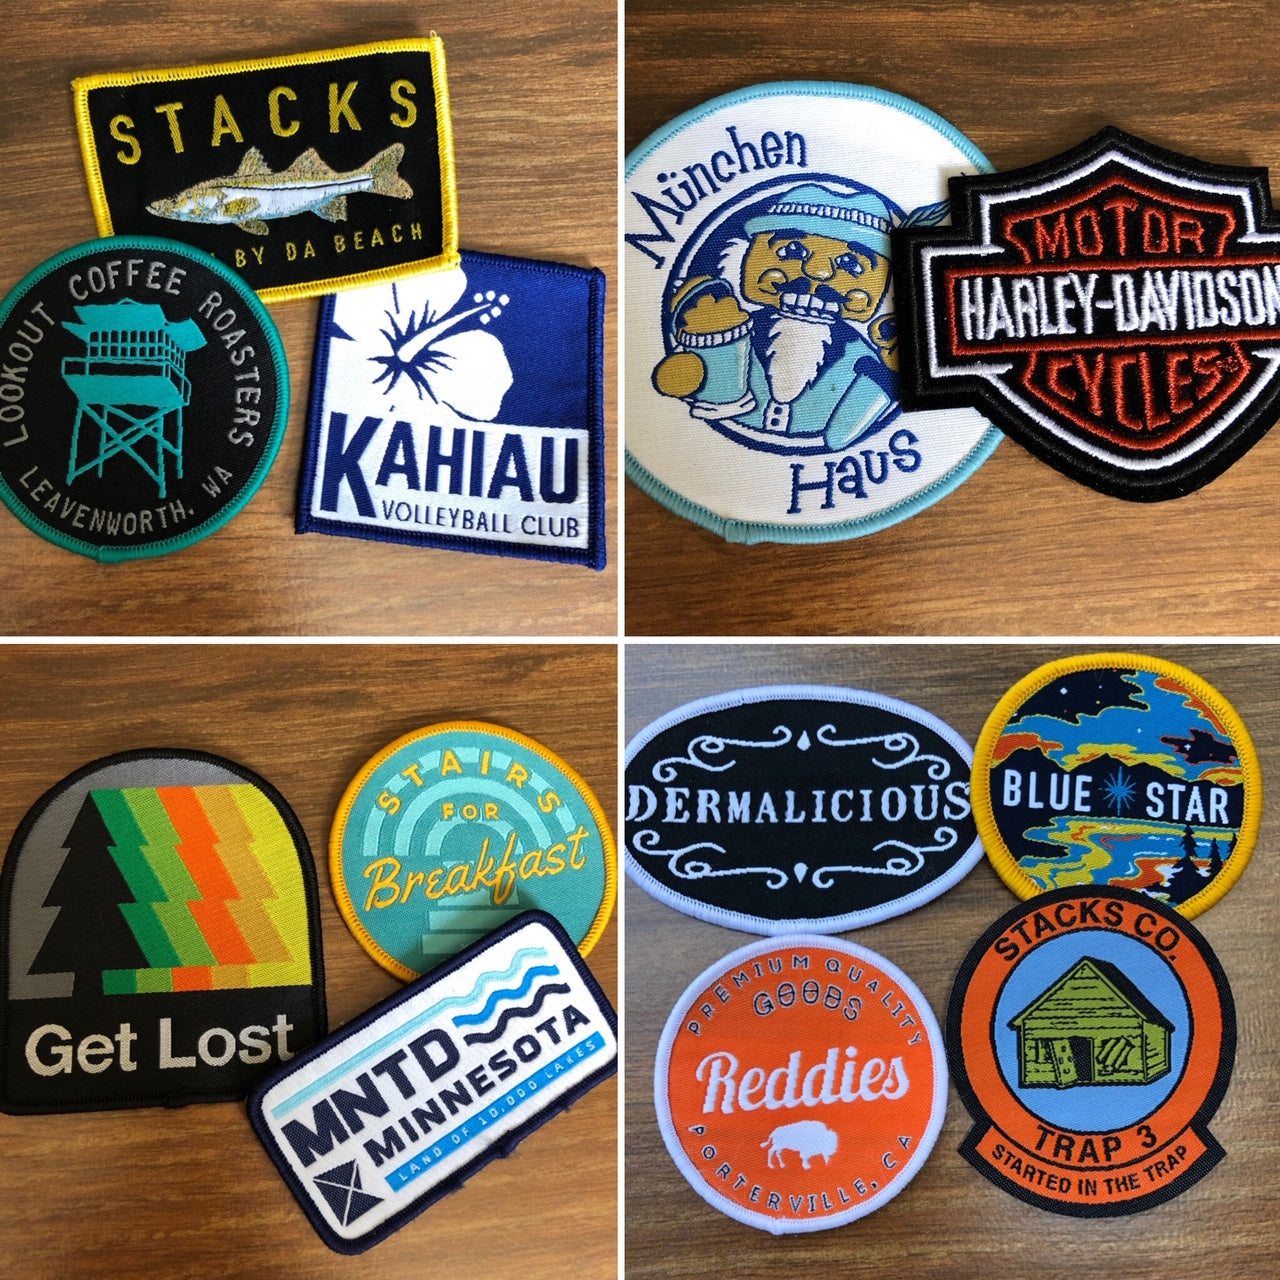  vihadevi Custom Embroidery Patches,Custom Patches for Your  Company and Team, Any Size, Any Shape can be Customized, Four Modes on The  Back: Hook and Loop, Iron on, Sew on, Pin on 